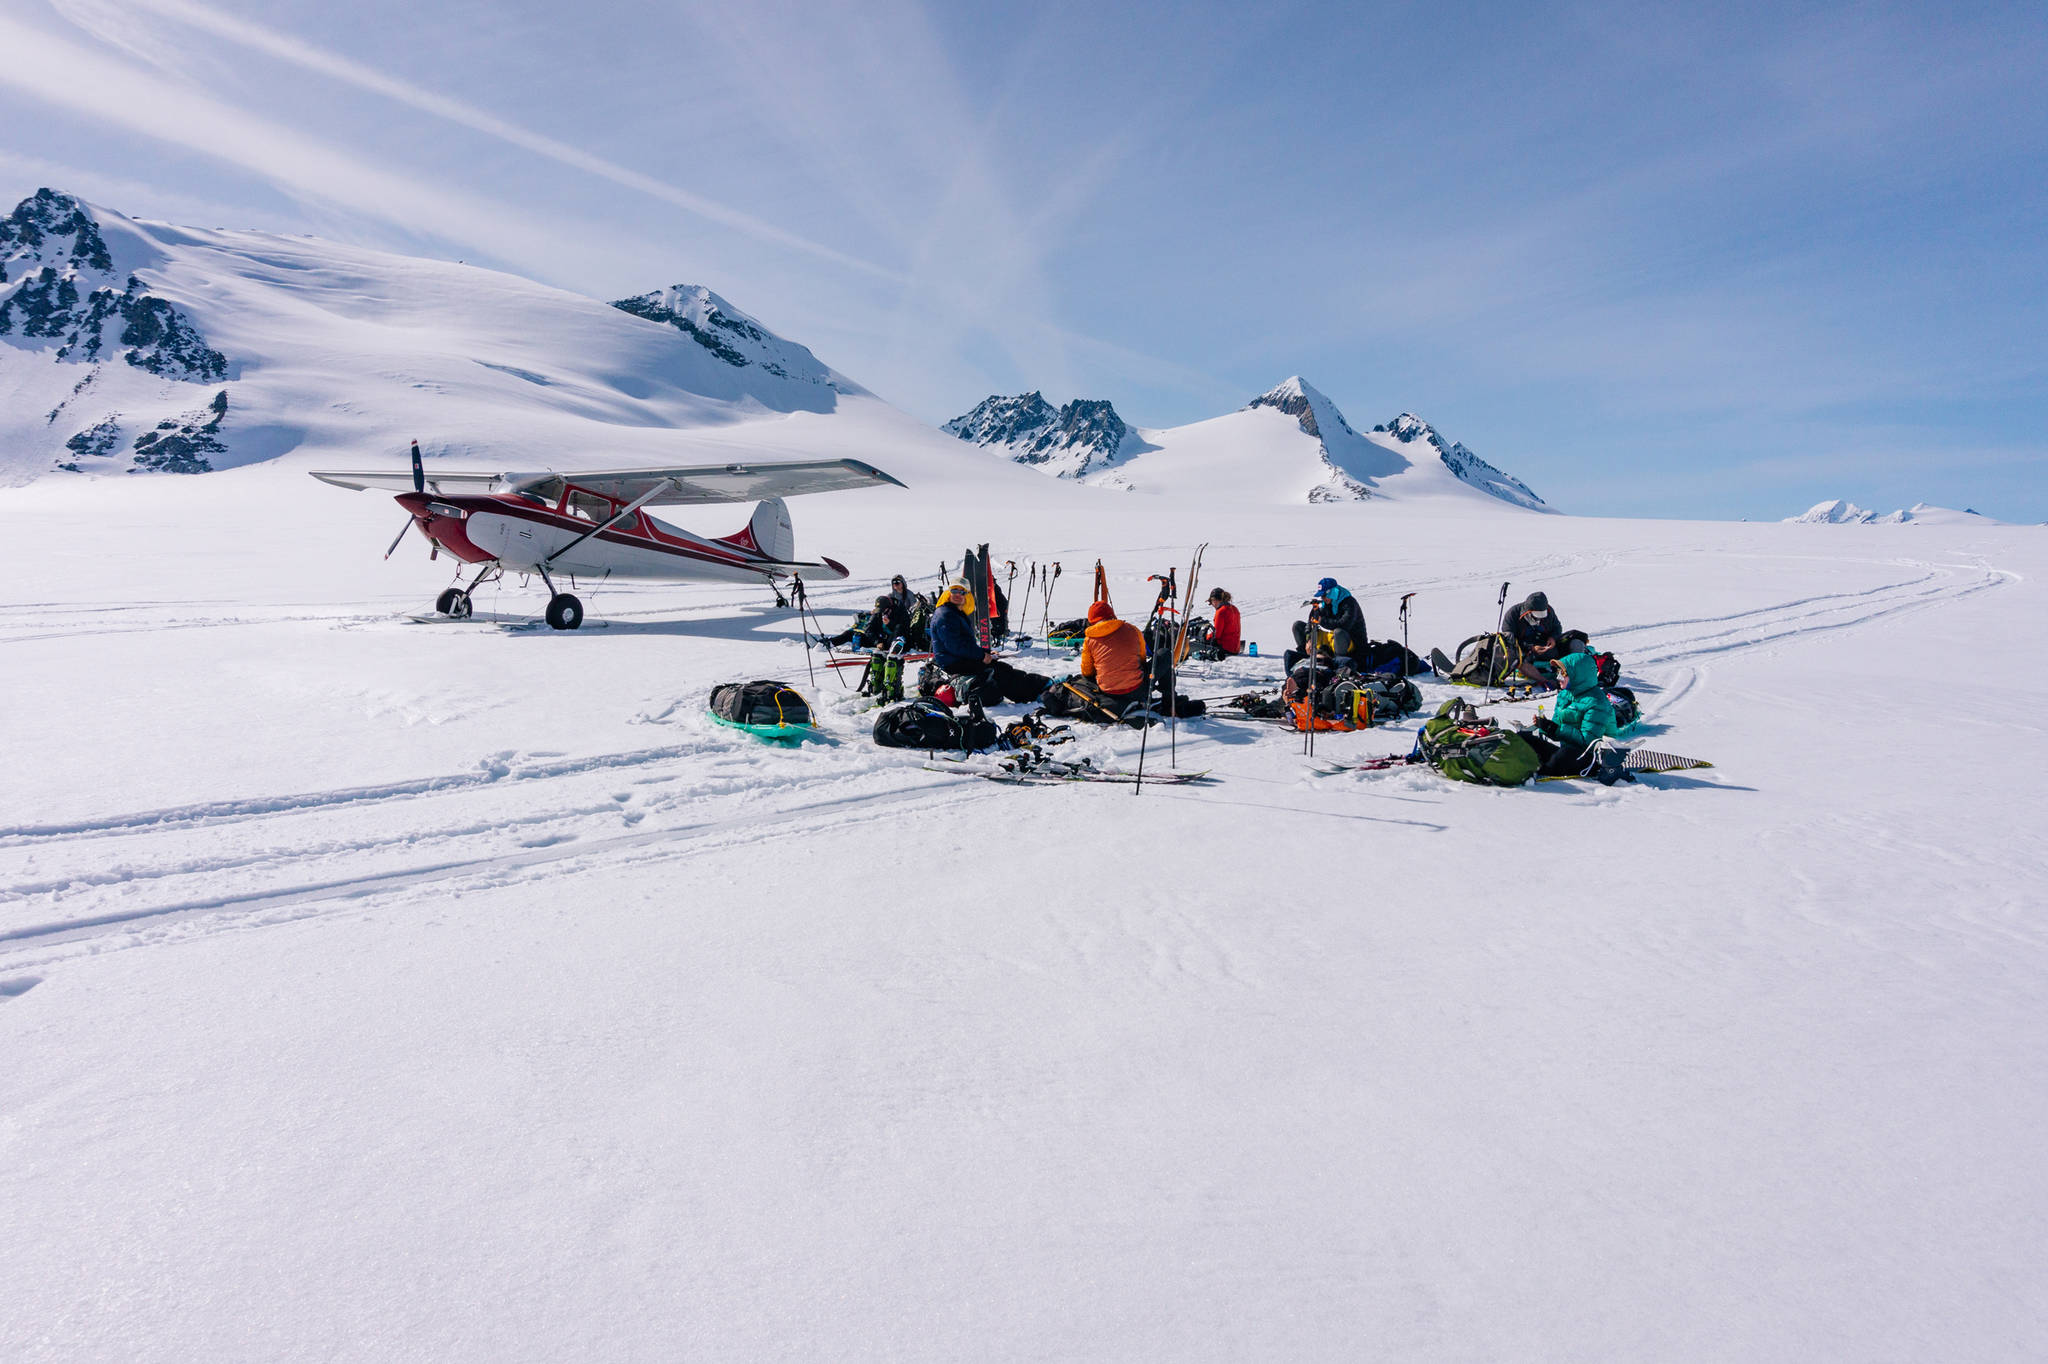 Jacek Maselko’s plane stands by while we have a snack break. (Gabe Donohoe | For the Juneau Empire)